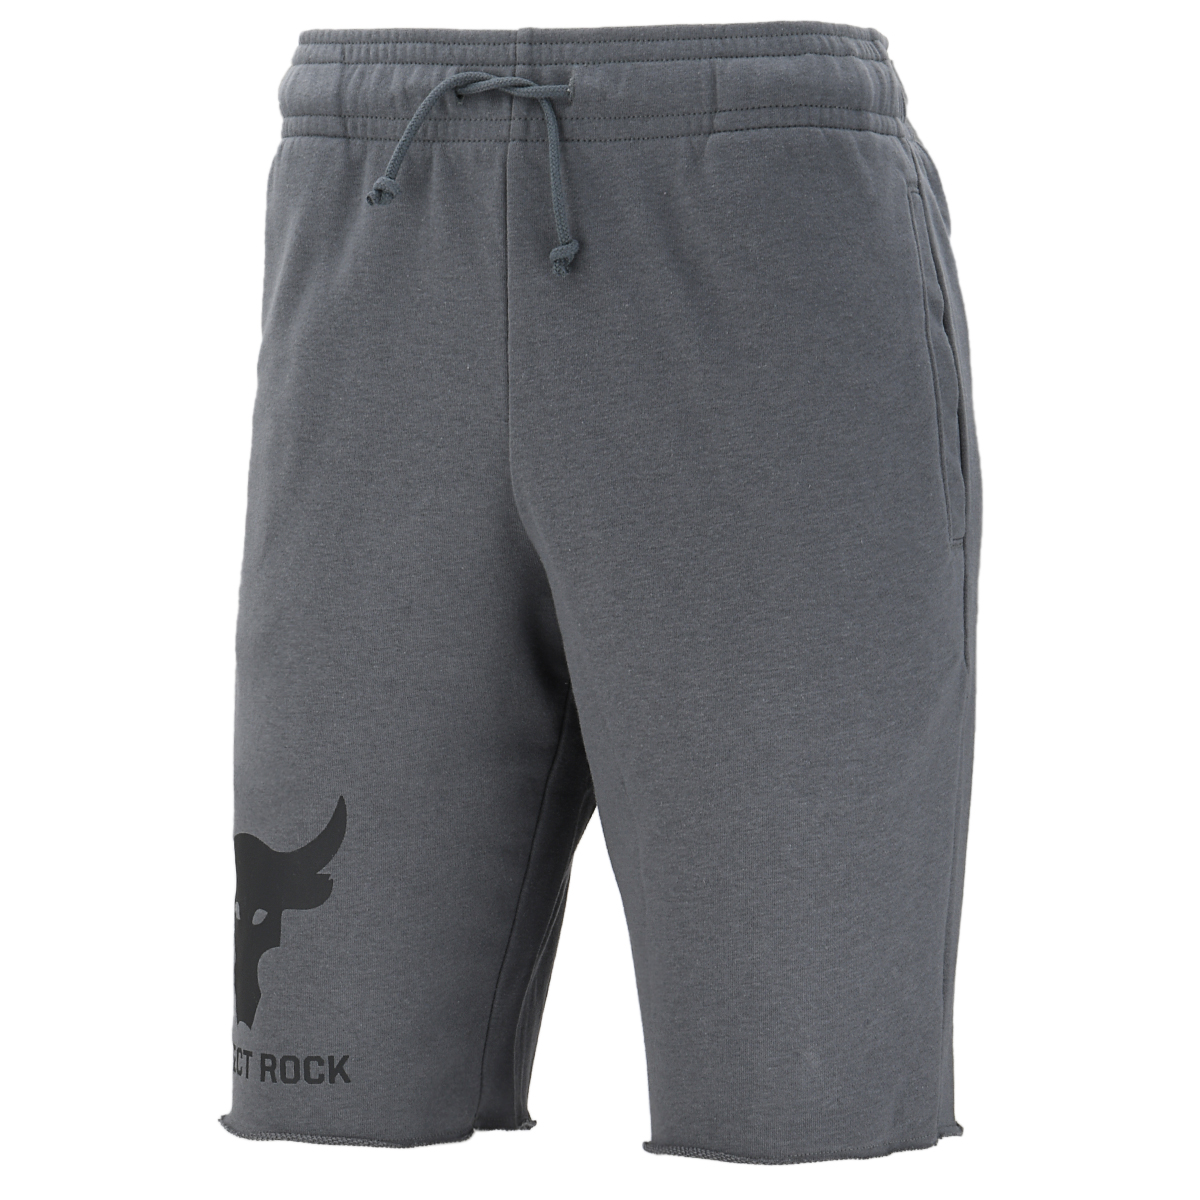 Short Entrenamiento Under Armour Project Rock Brahma Bull Hombre,  image number null